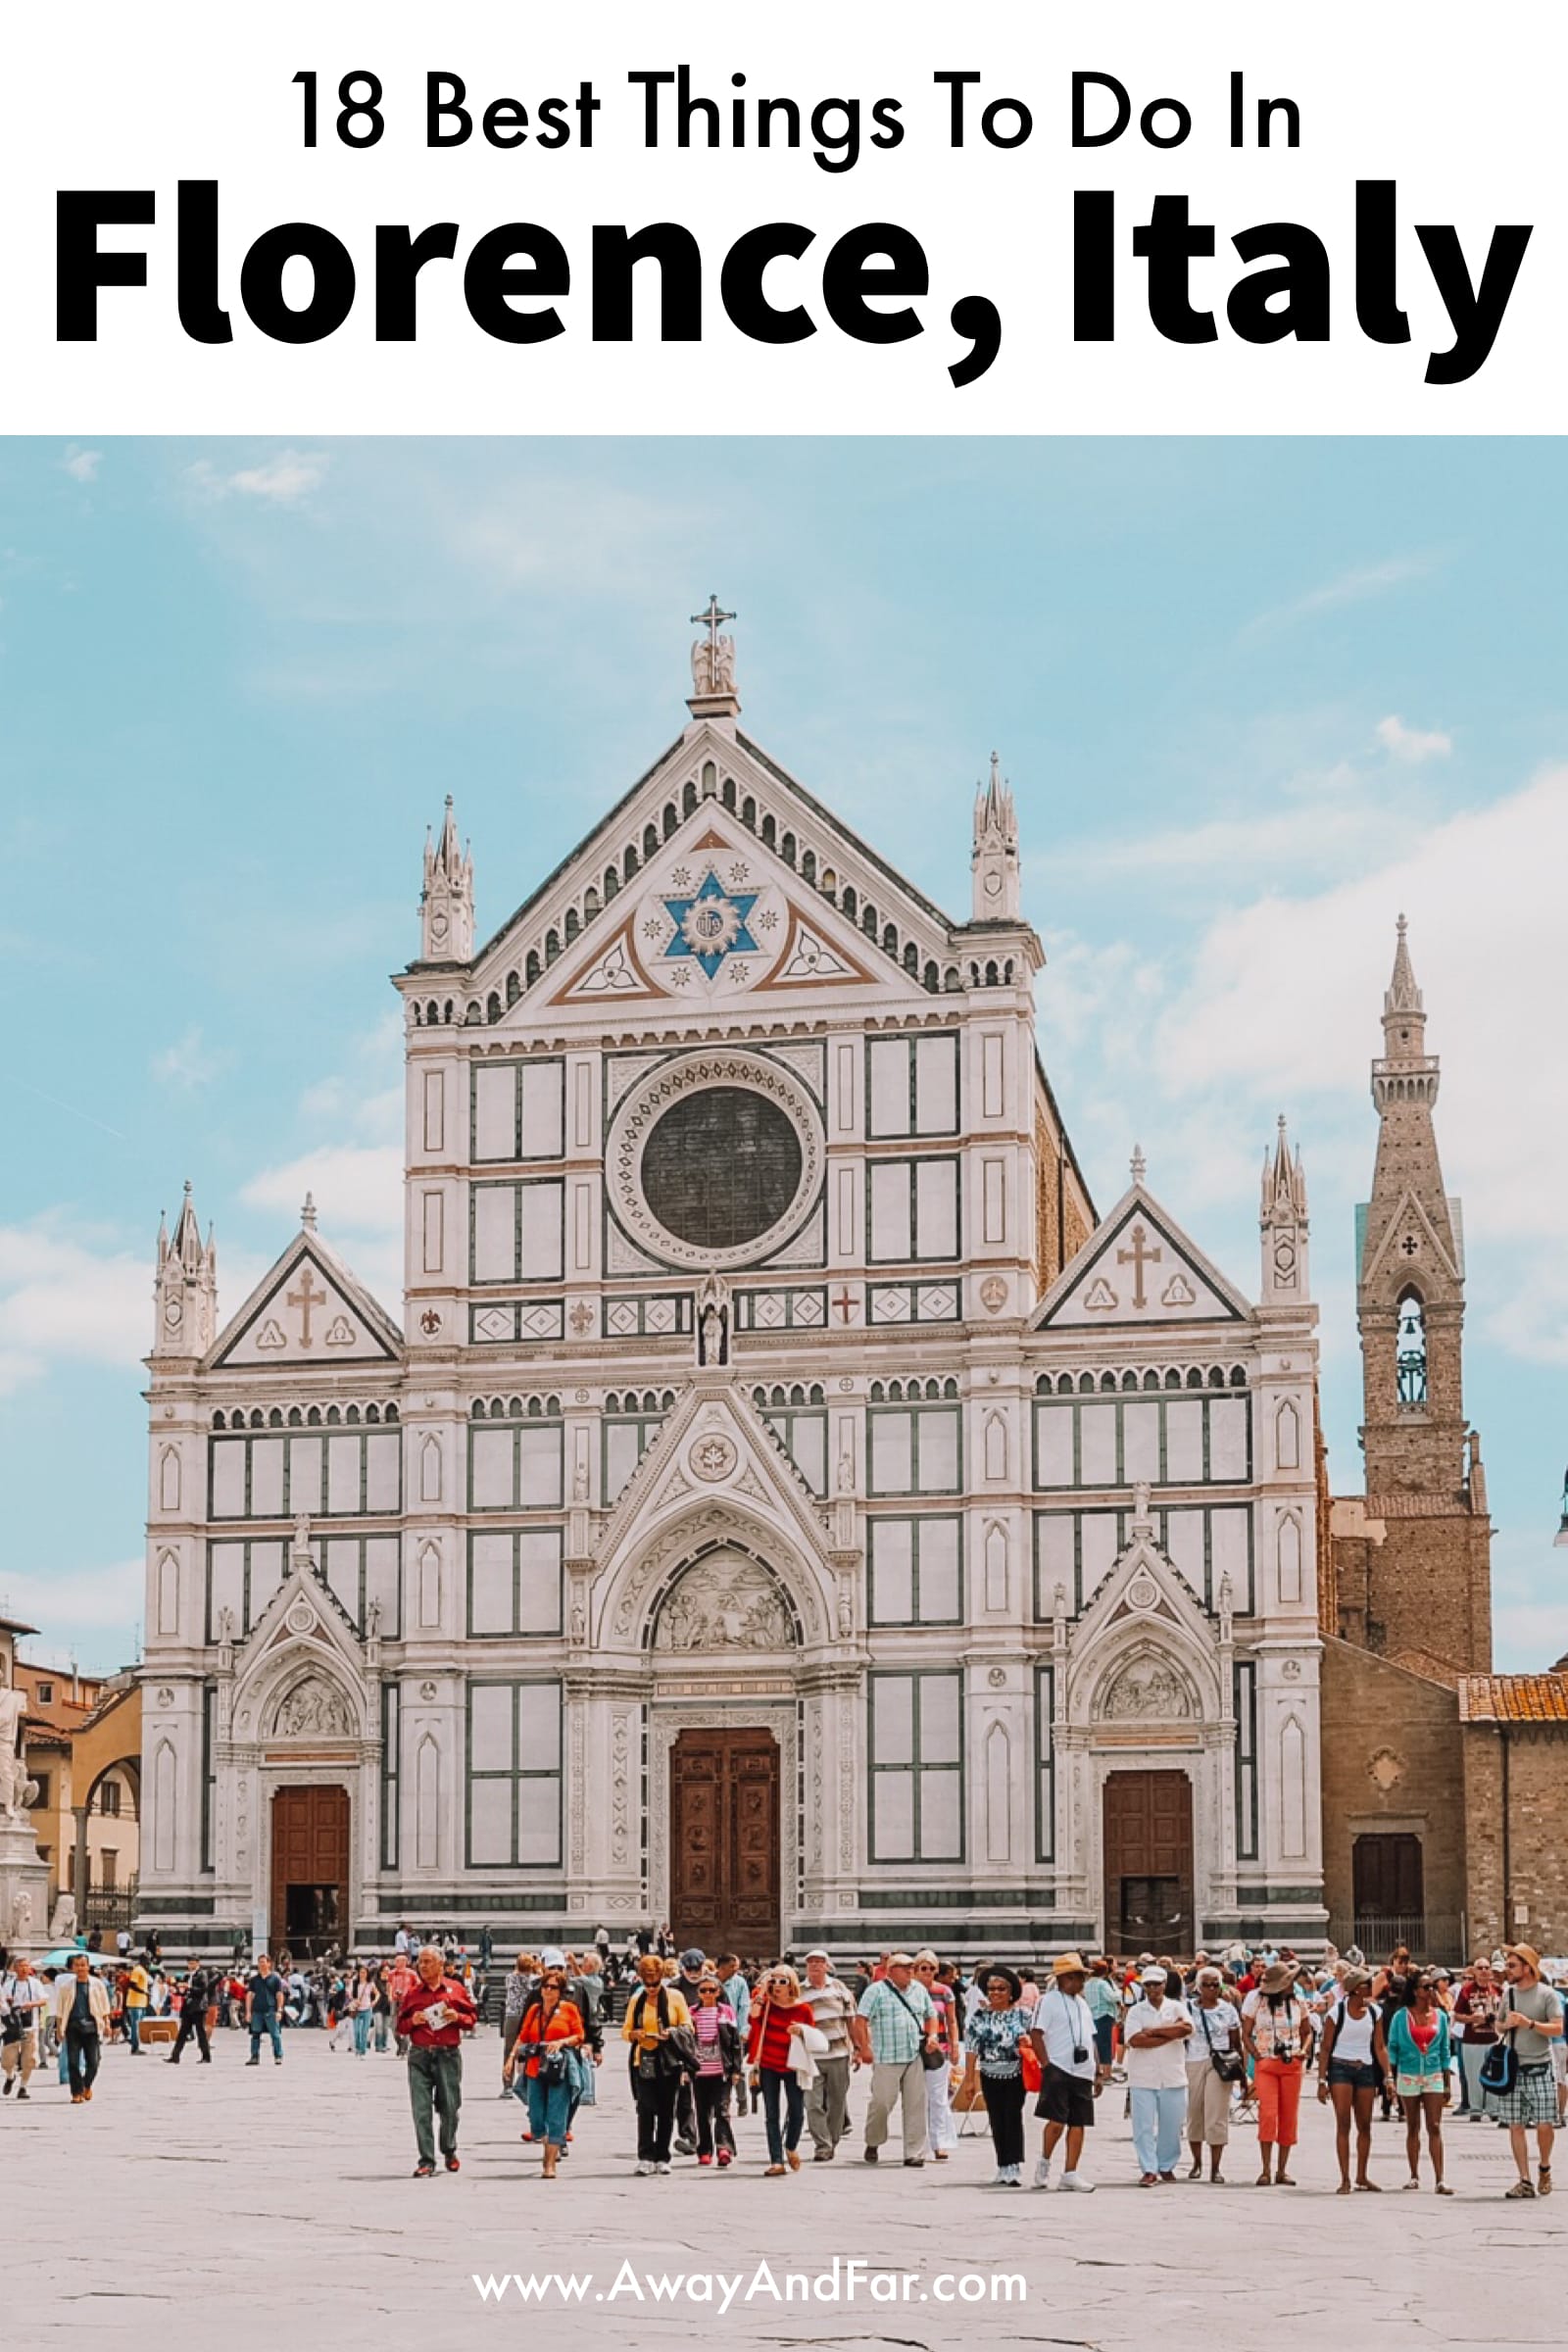 18 Best Things To Do In Florence, Italy (1)